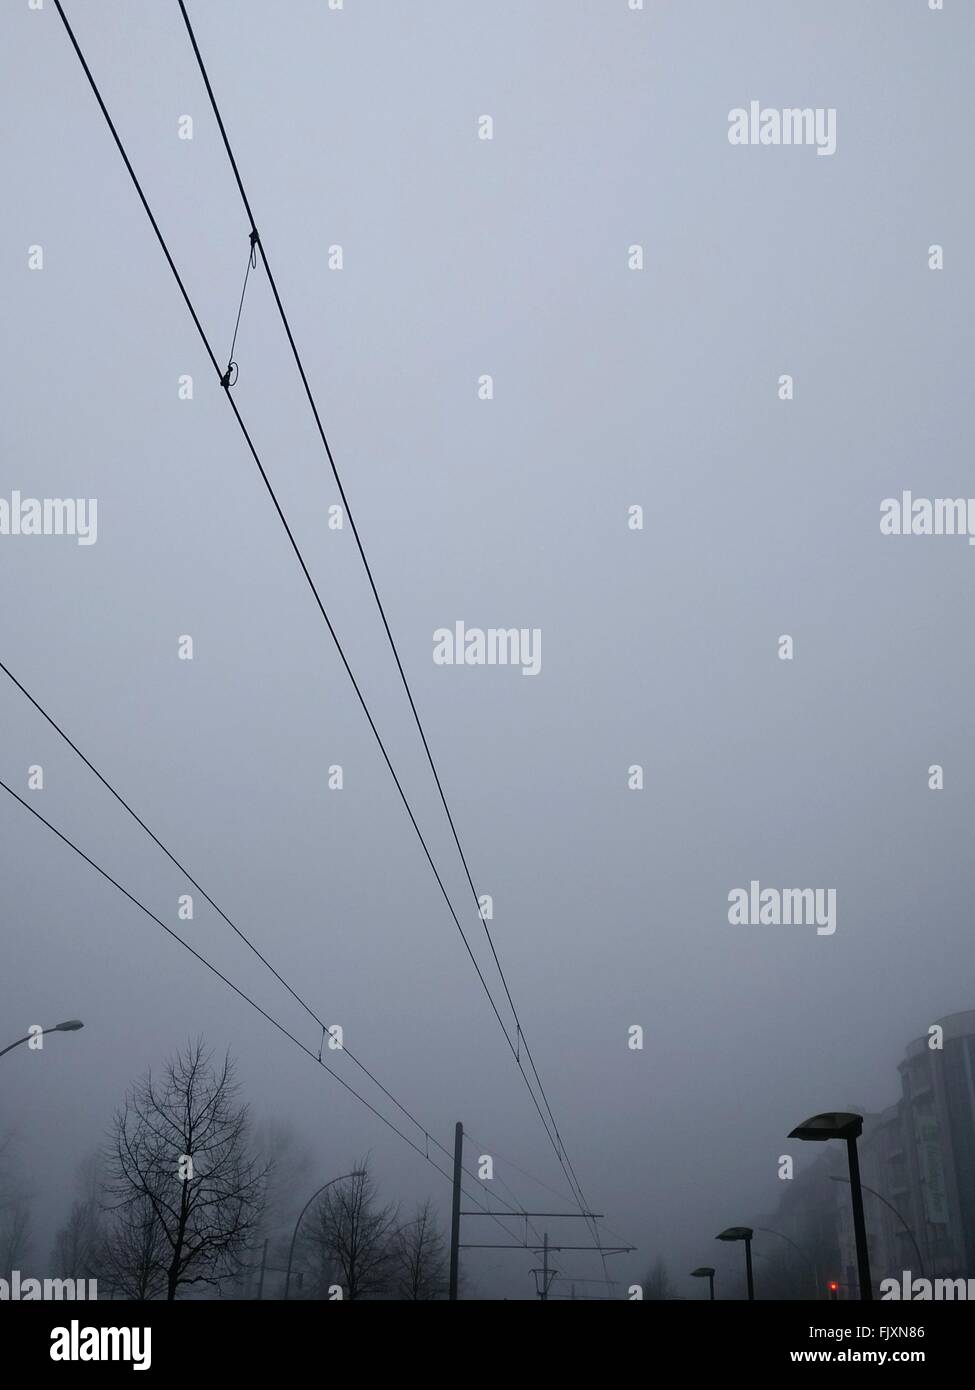 Low Angle View Of Power Lines Against Sky In Foggy Weather Stock Photo